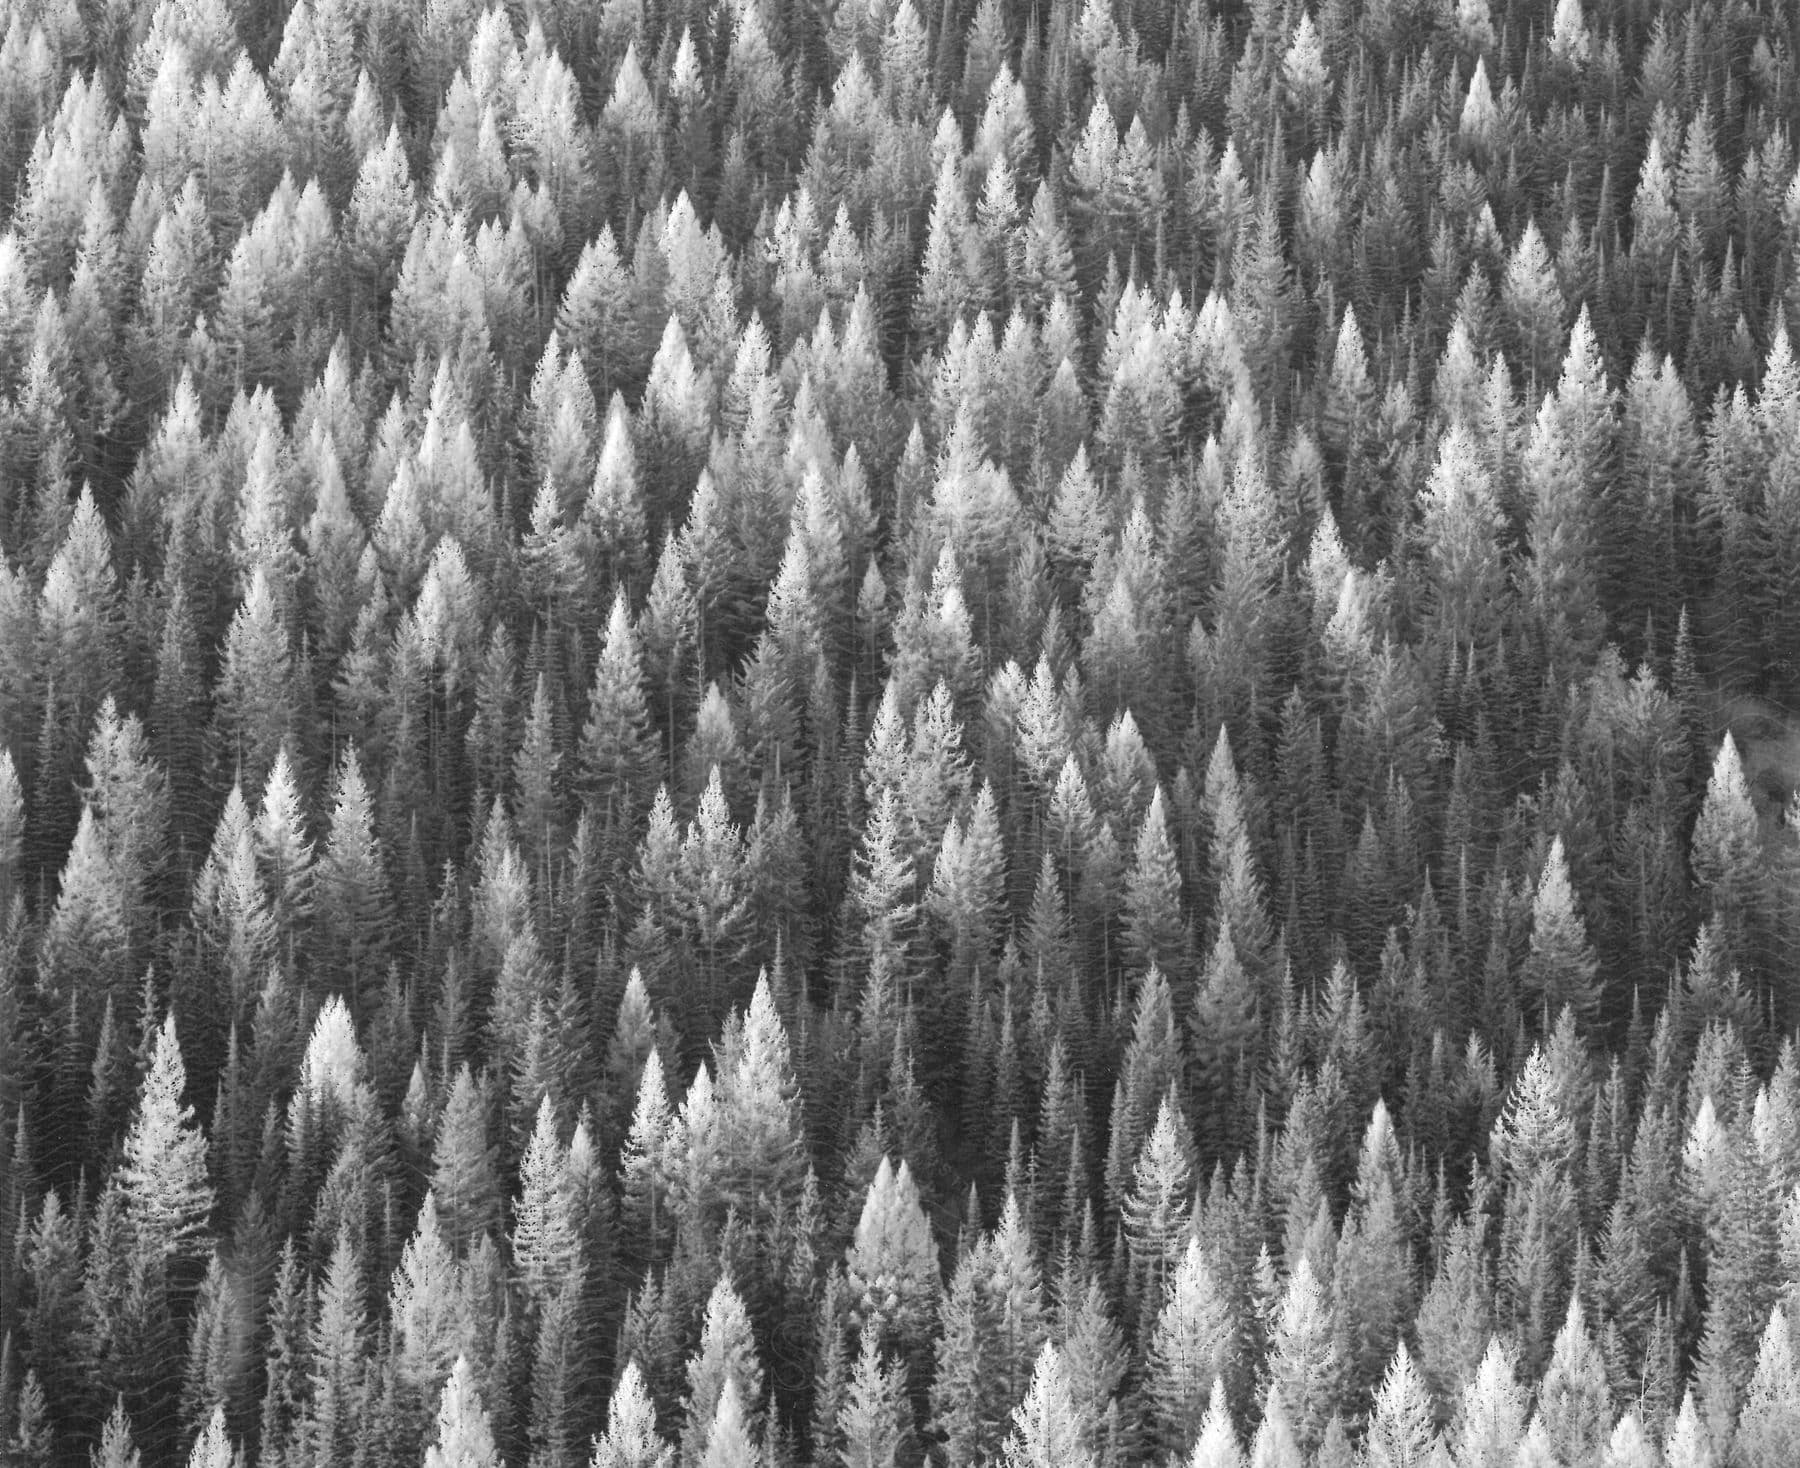 Aerial view of a black and white forest